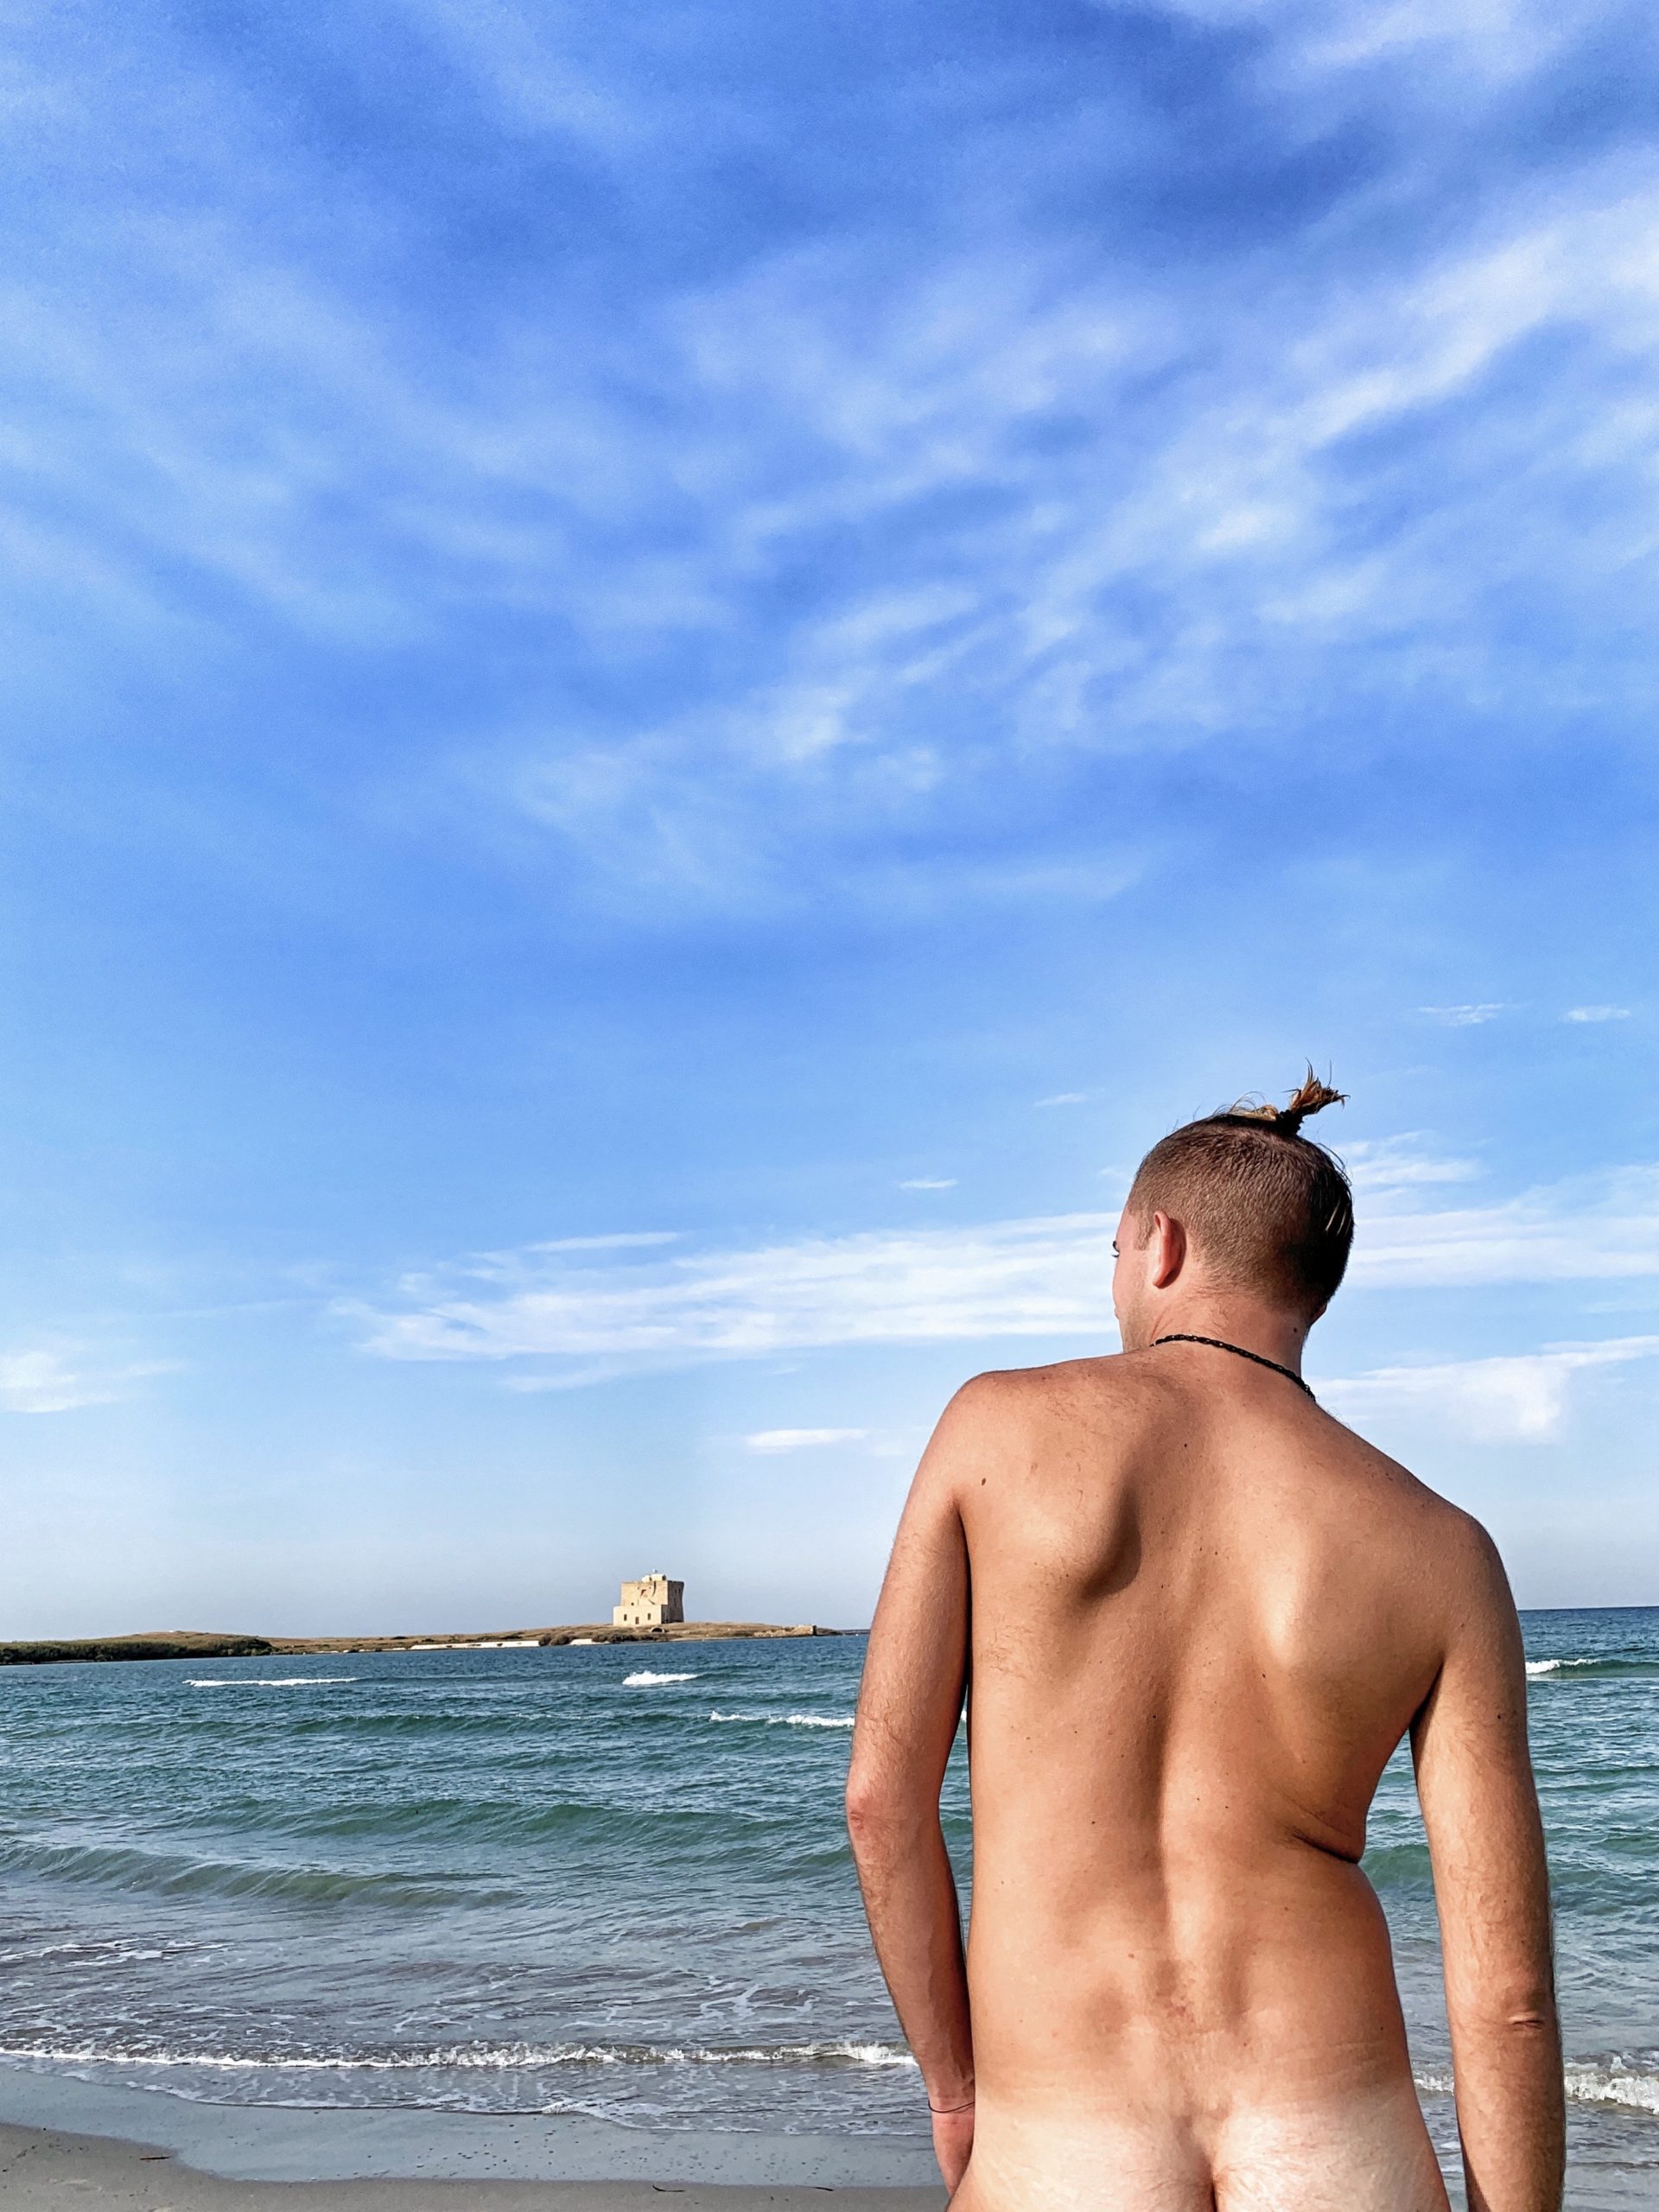 Gay Puglia - the Big Gay Podcast from Puglia. Serving up Puglia’s finest food and destination recommendations. Italy’s best naturist and gay beaches are in Puglia.